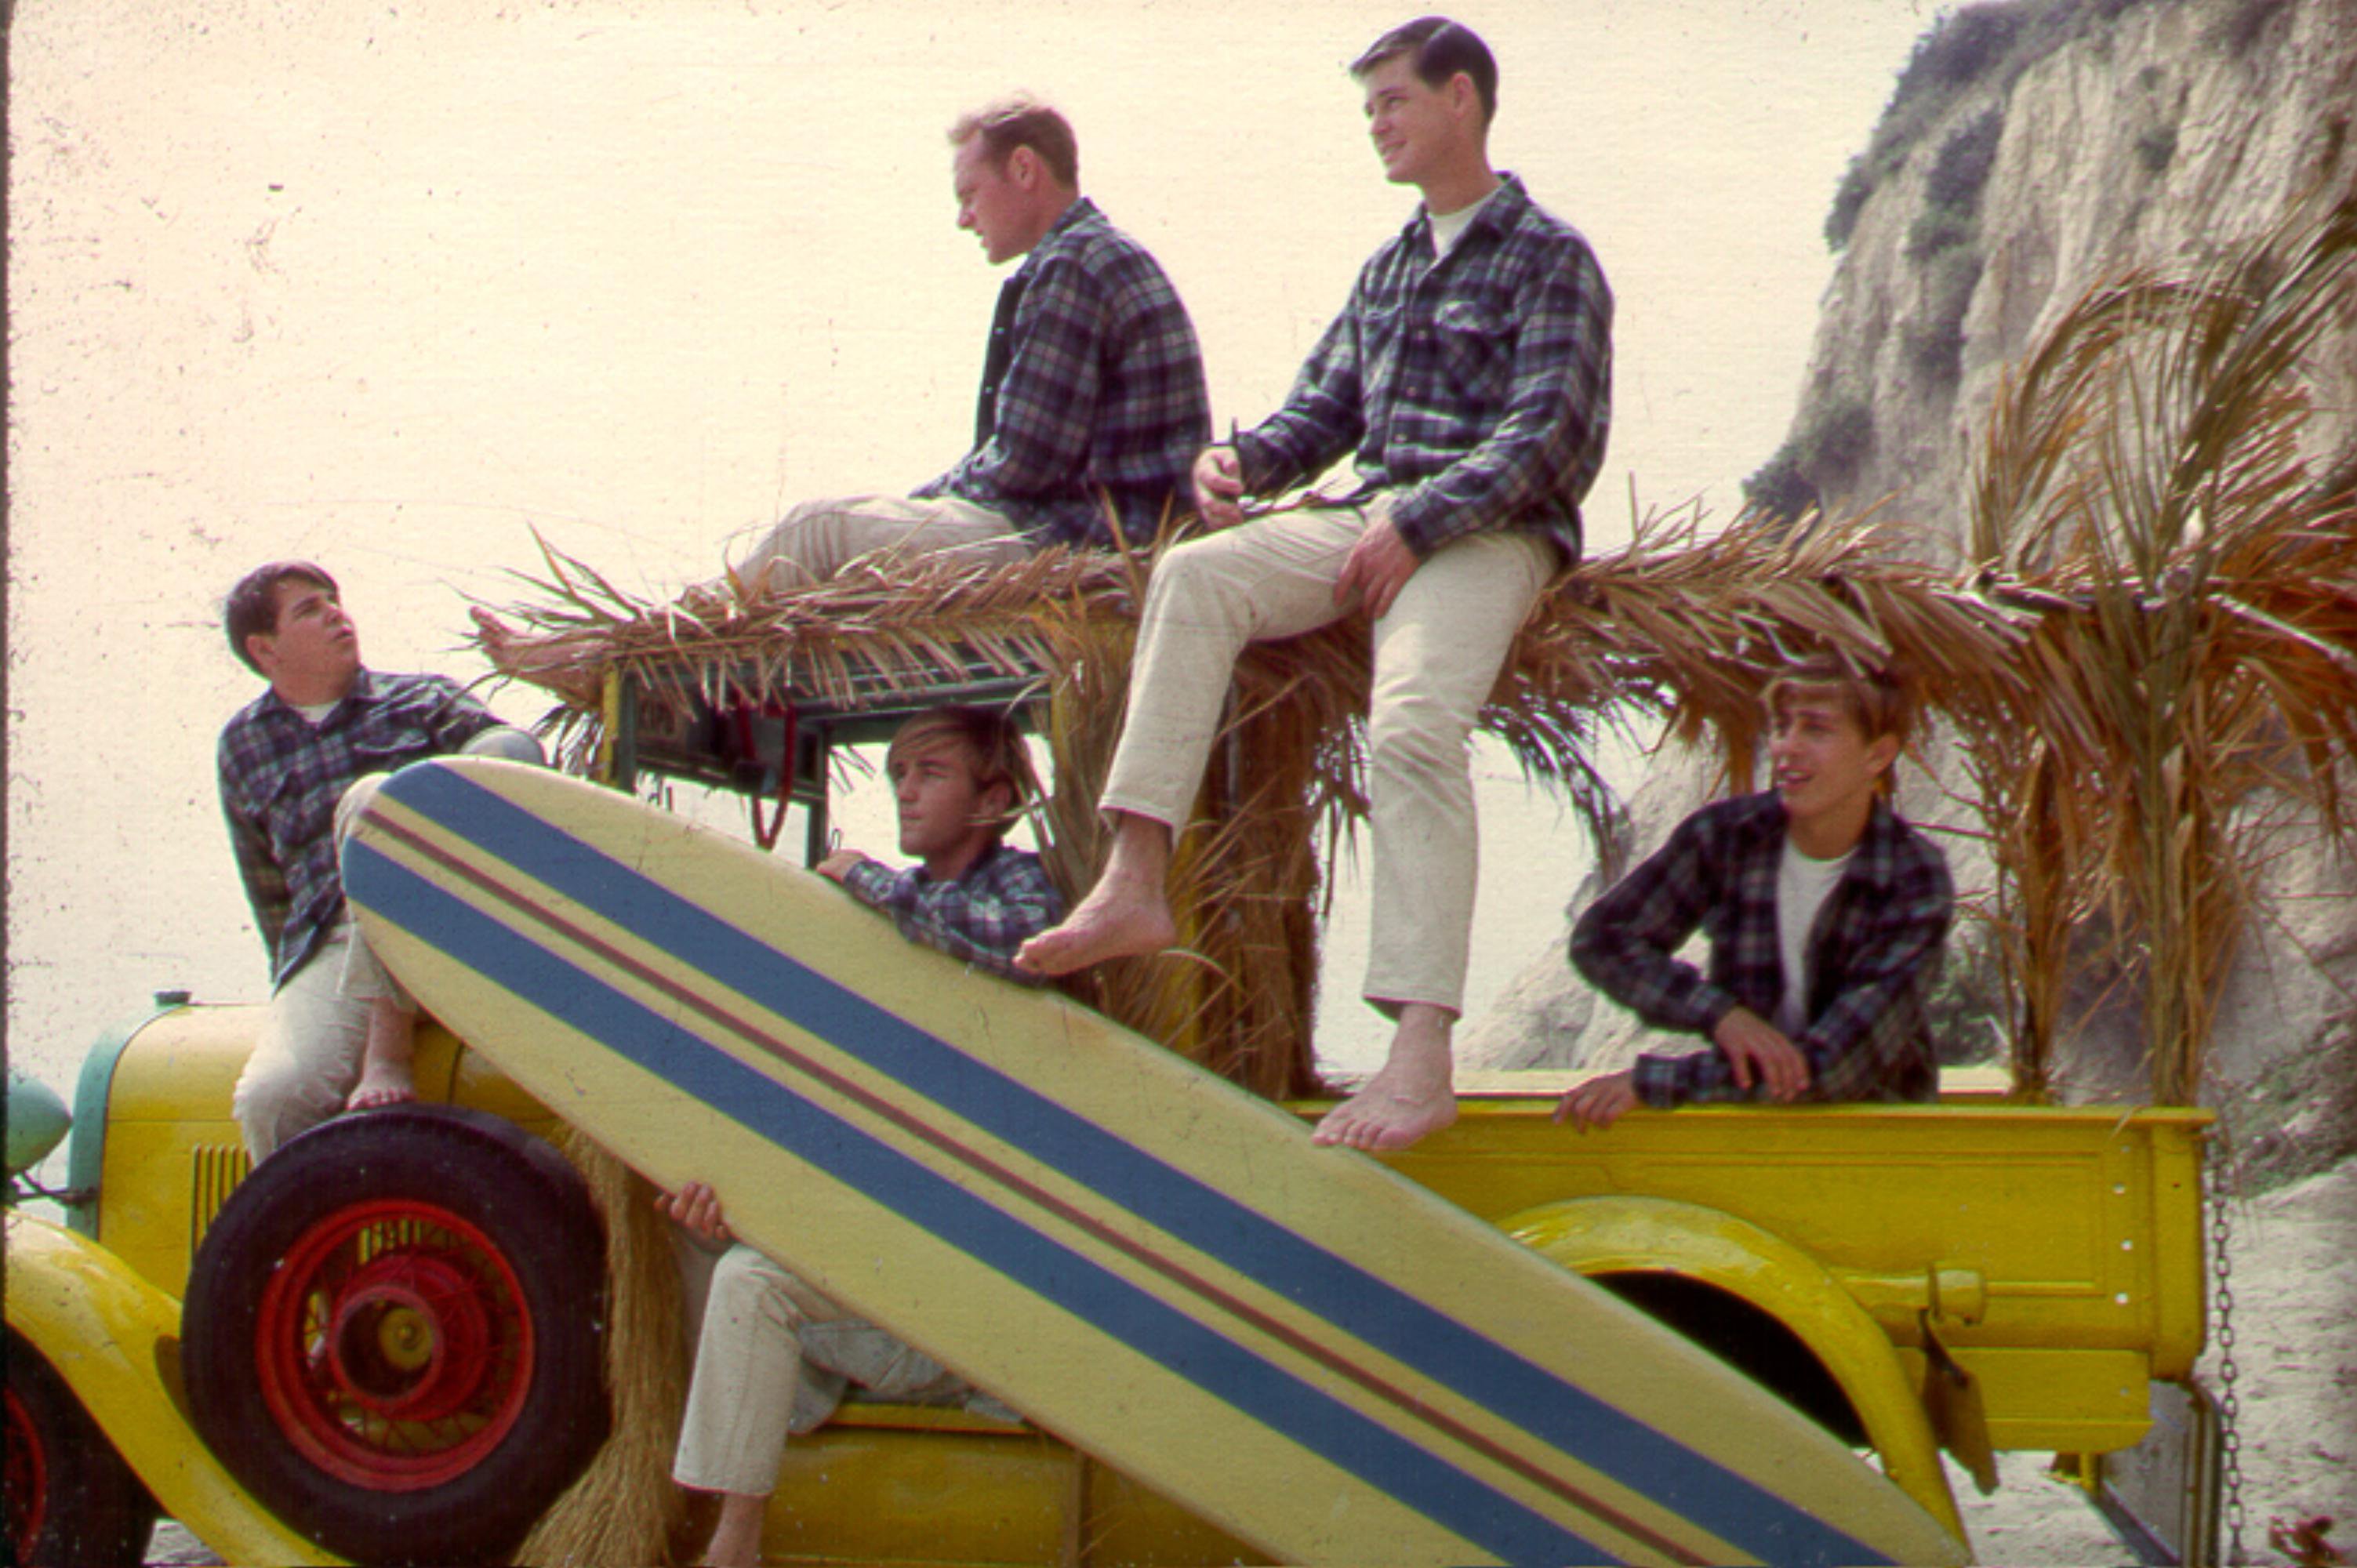 The Beach Boys in blue around the time they released a hit inspired by one of Disney's songs